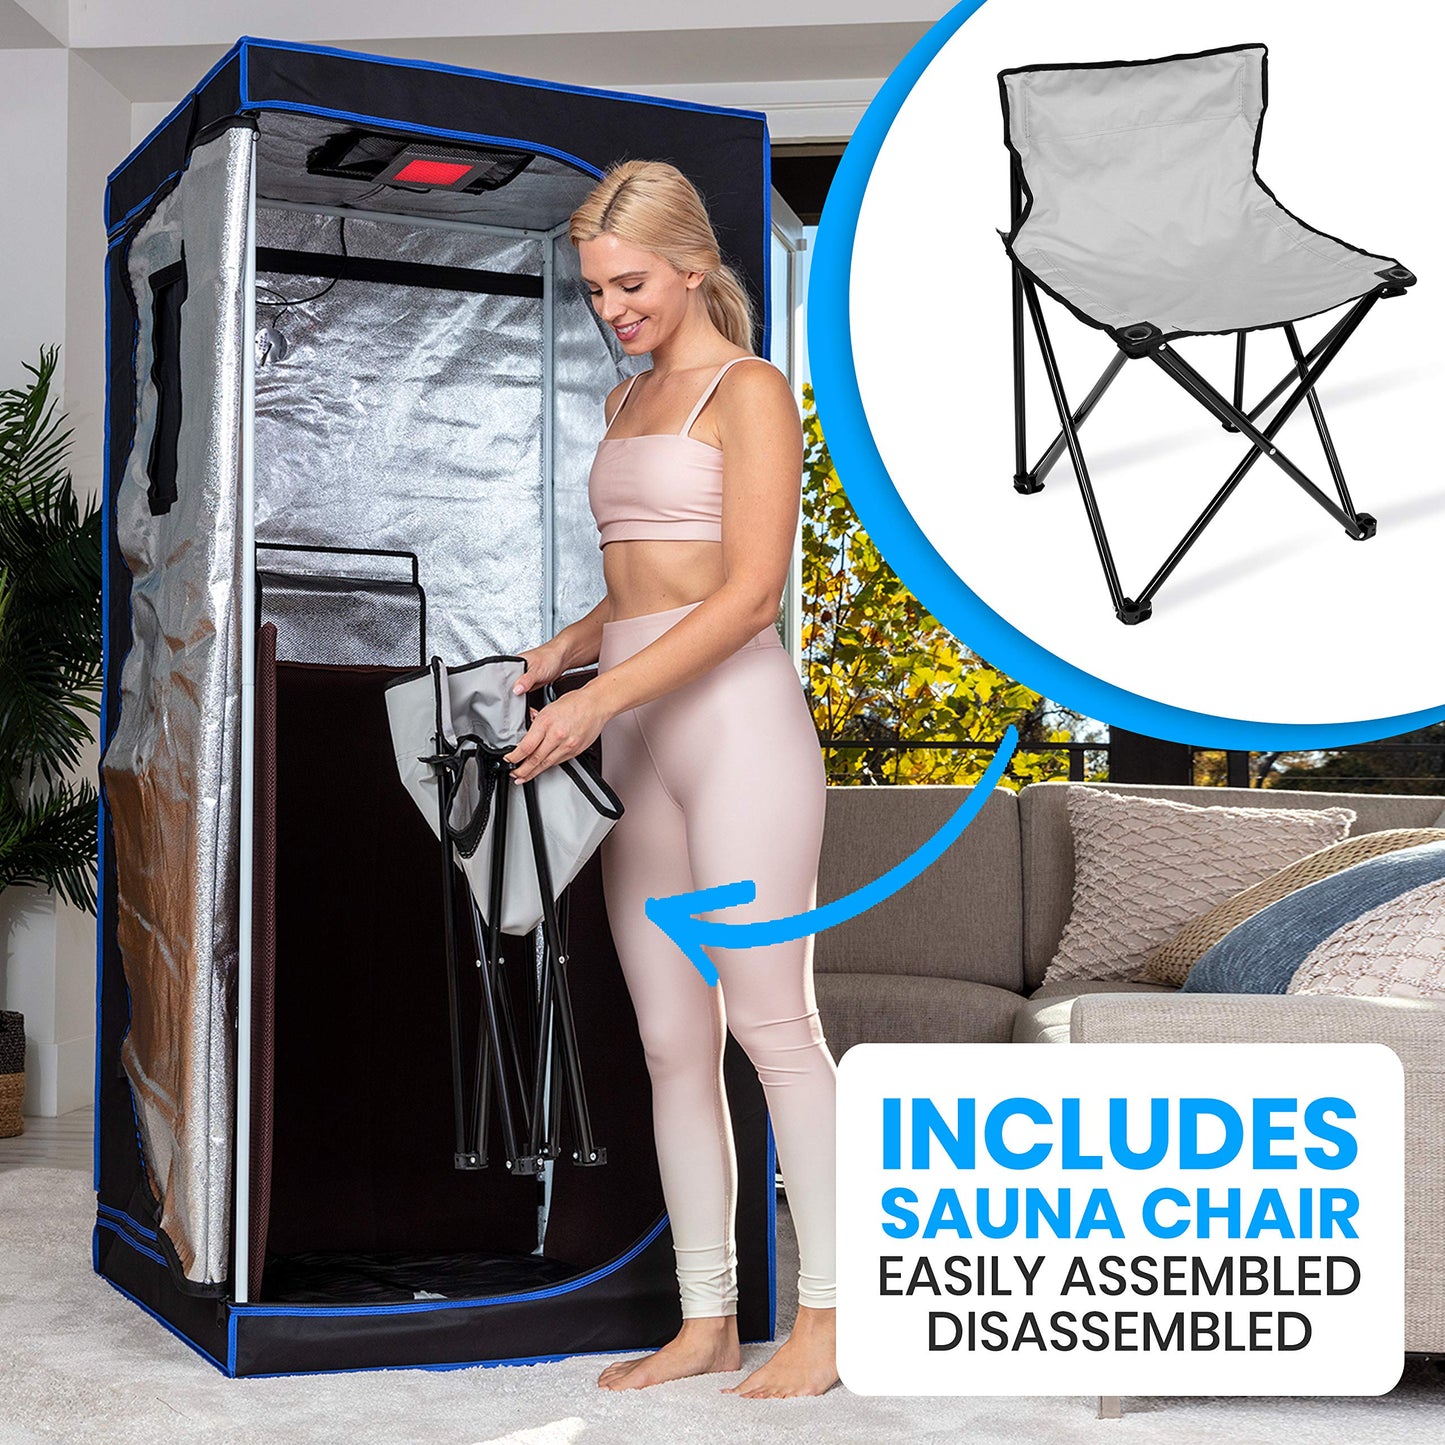 SereneLife Portable Full Size Infrared Home Spa| One Person Sauna | with Heating Foot Pad and Portable Chair